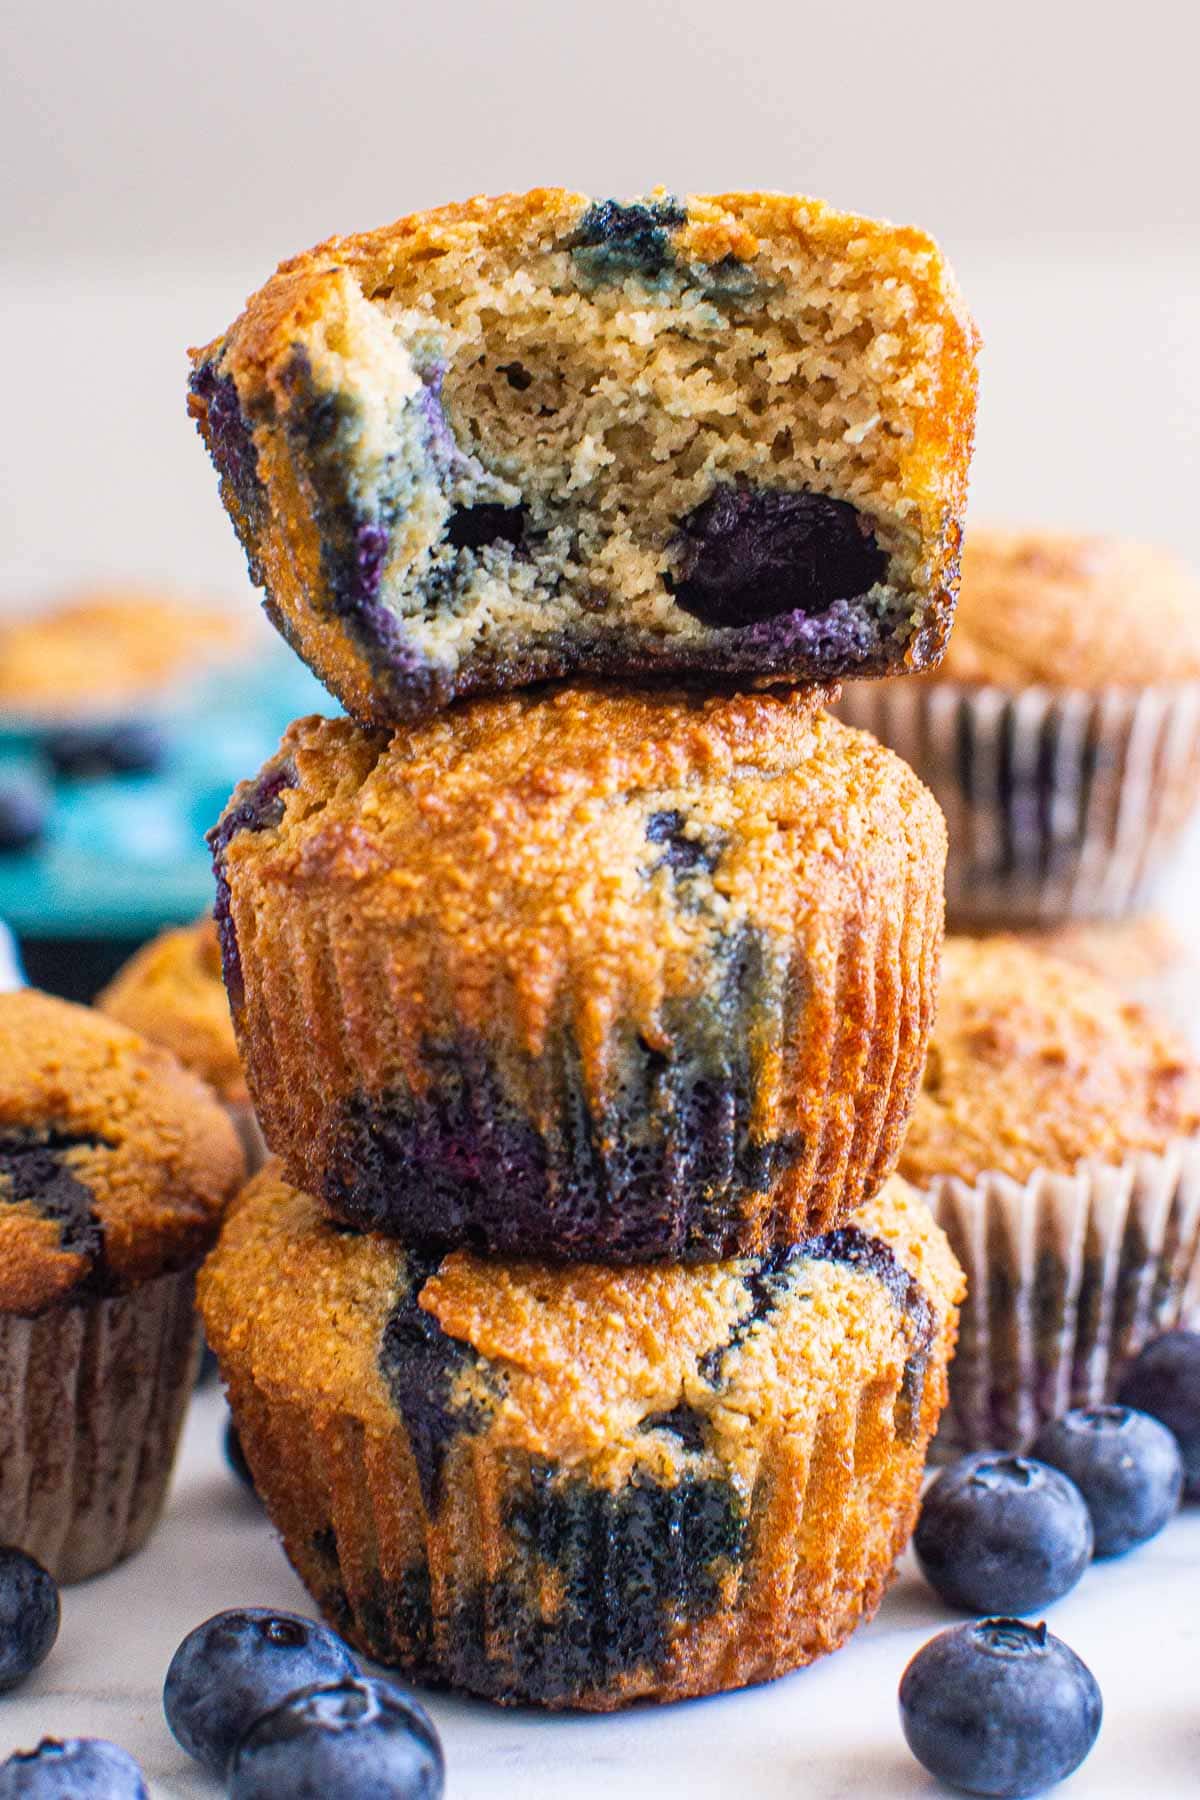 Three stacked almond flour blueberry muffins and top one showing texture inside.